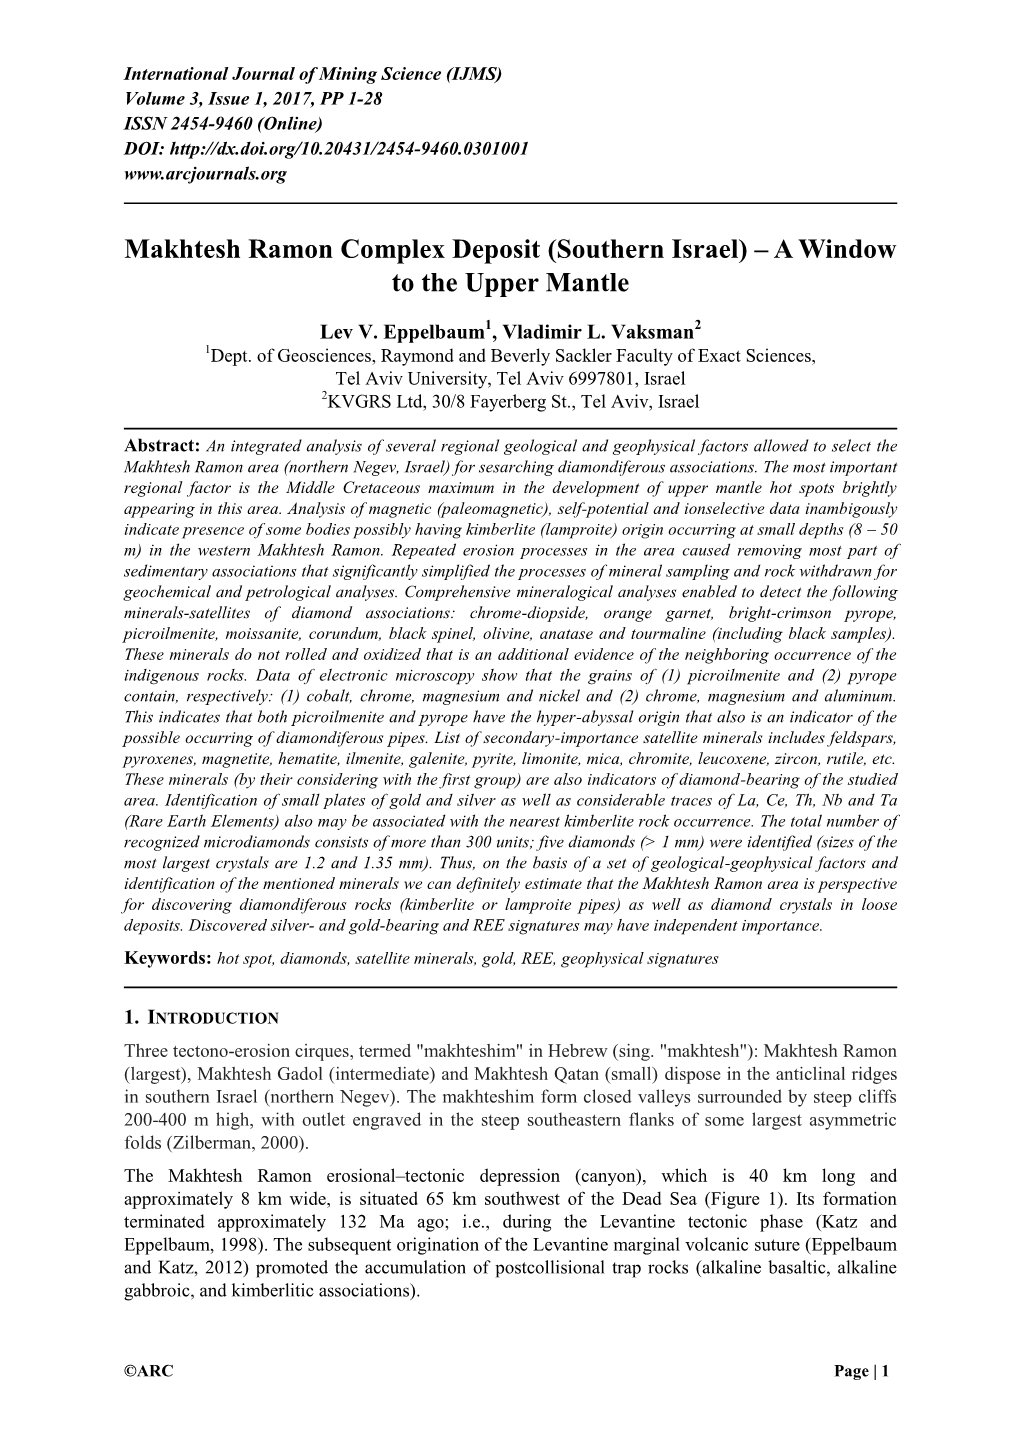 Makhtesh Ramon Complex Deposit (Southern Israel) – a Window to the Upper Mantle